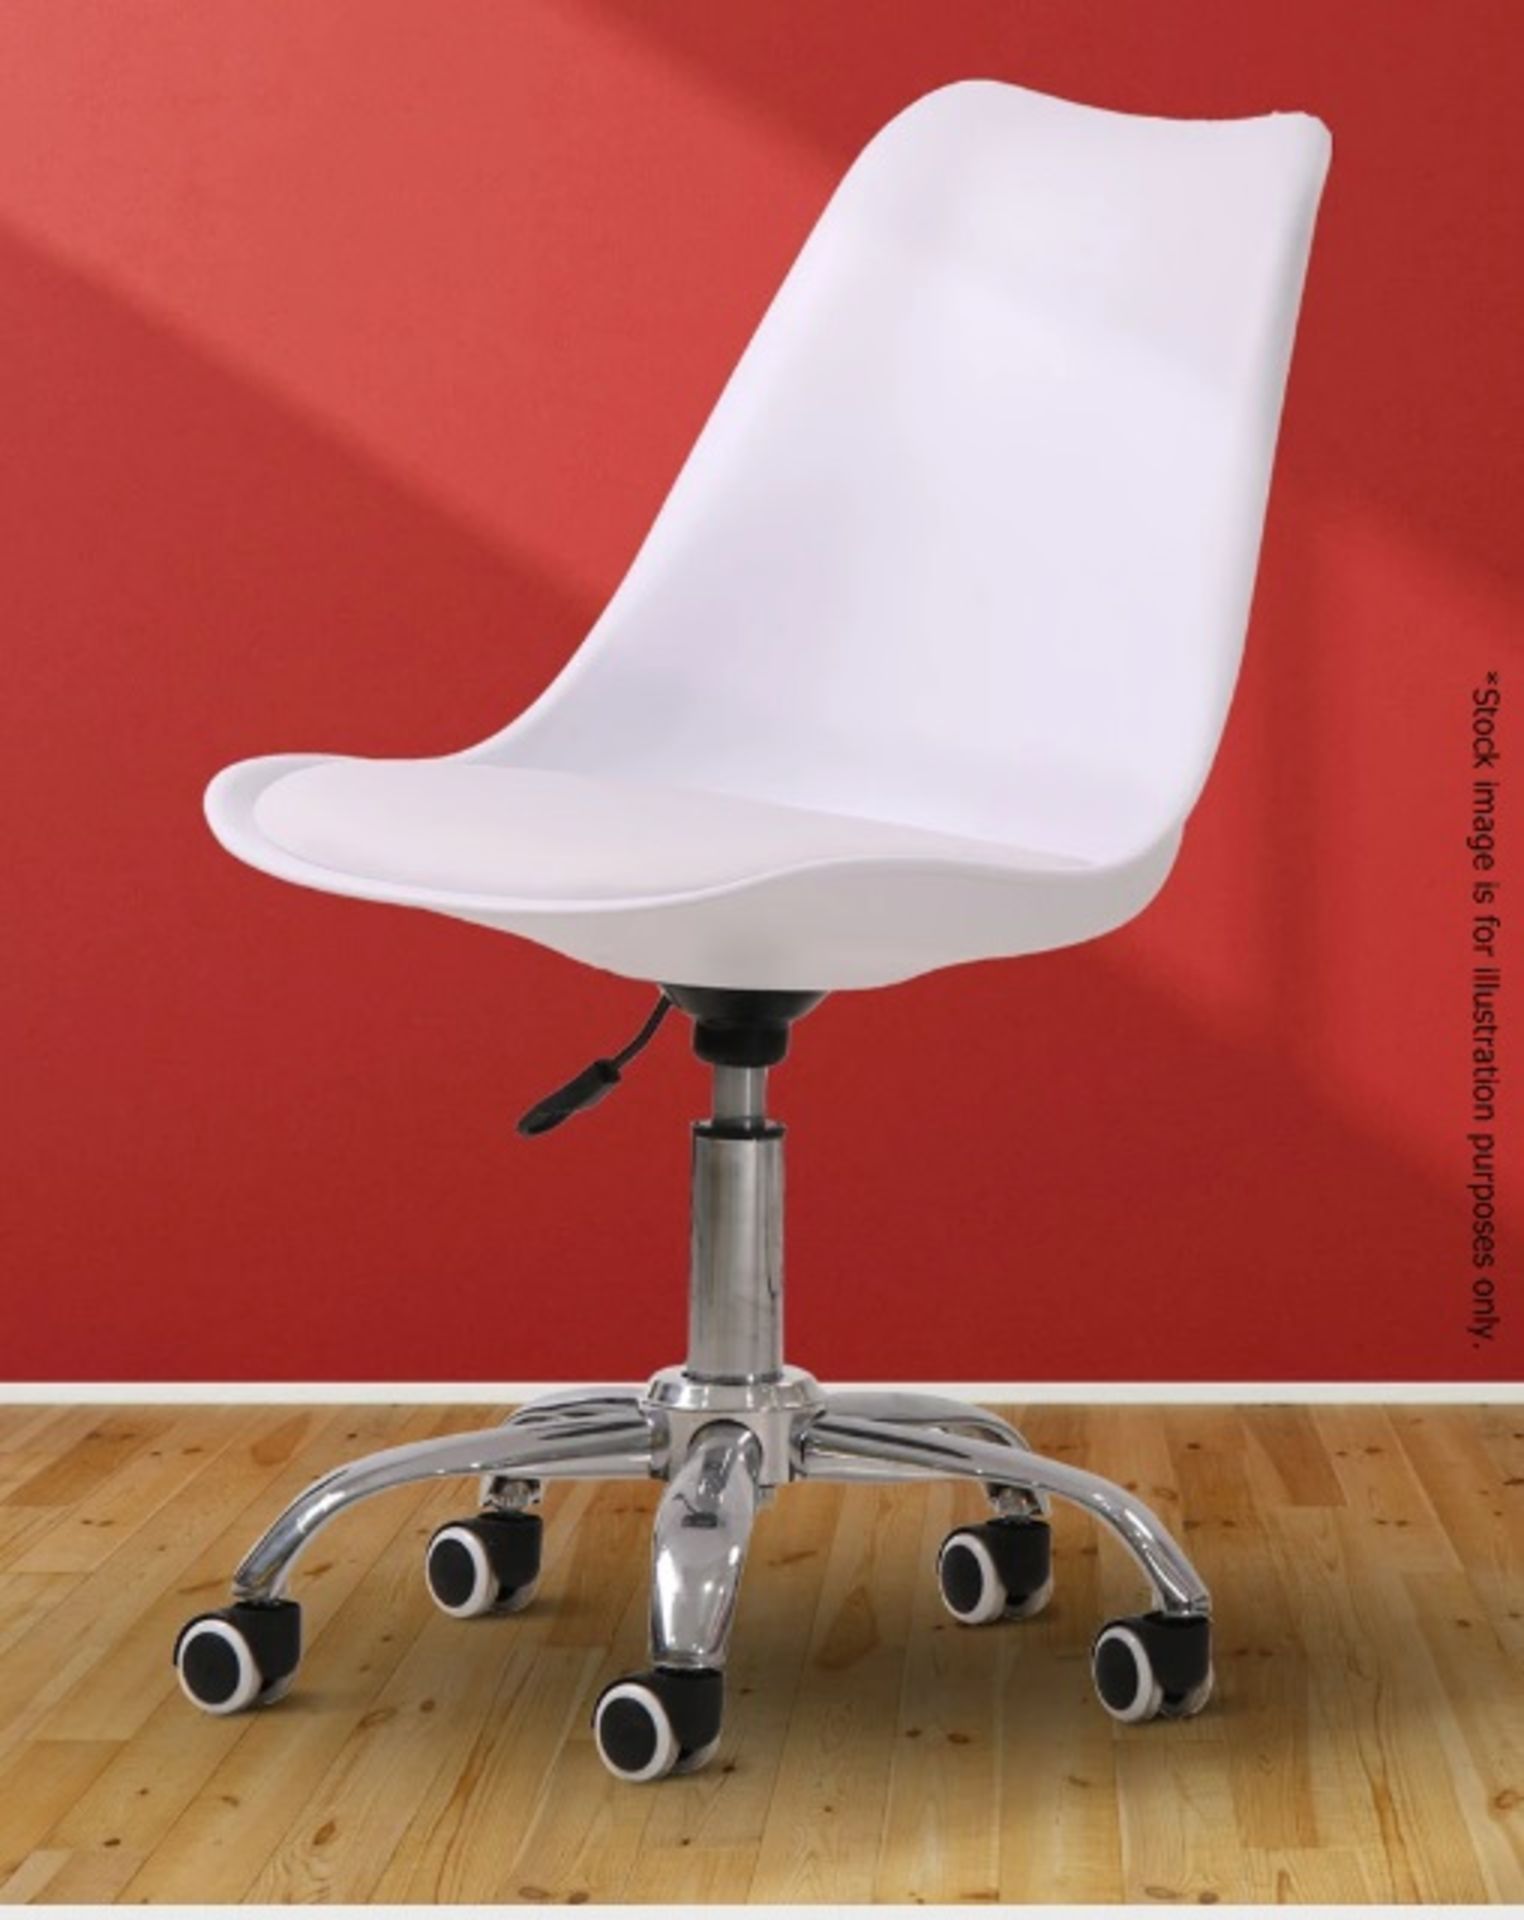 1 x Contemporary Adjustable Hydraulic Office Swivel Chair In White With Chrome Base On Castors